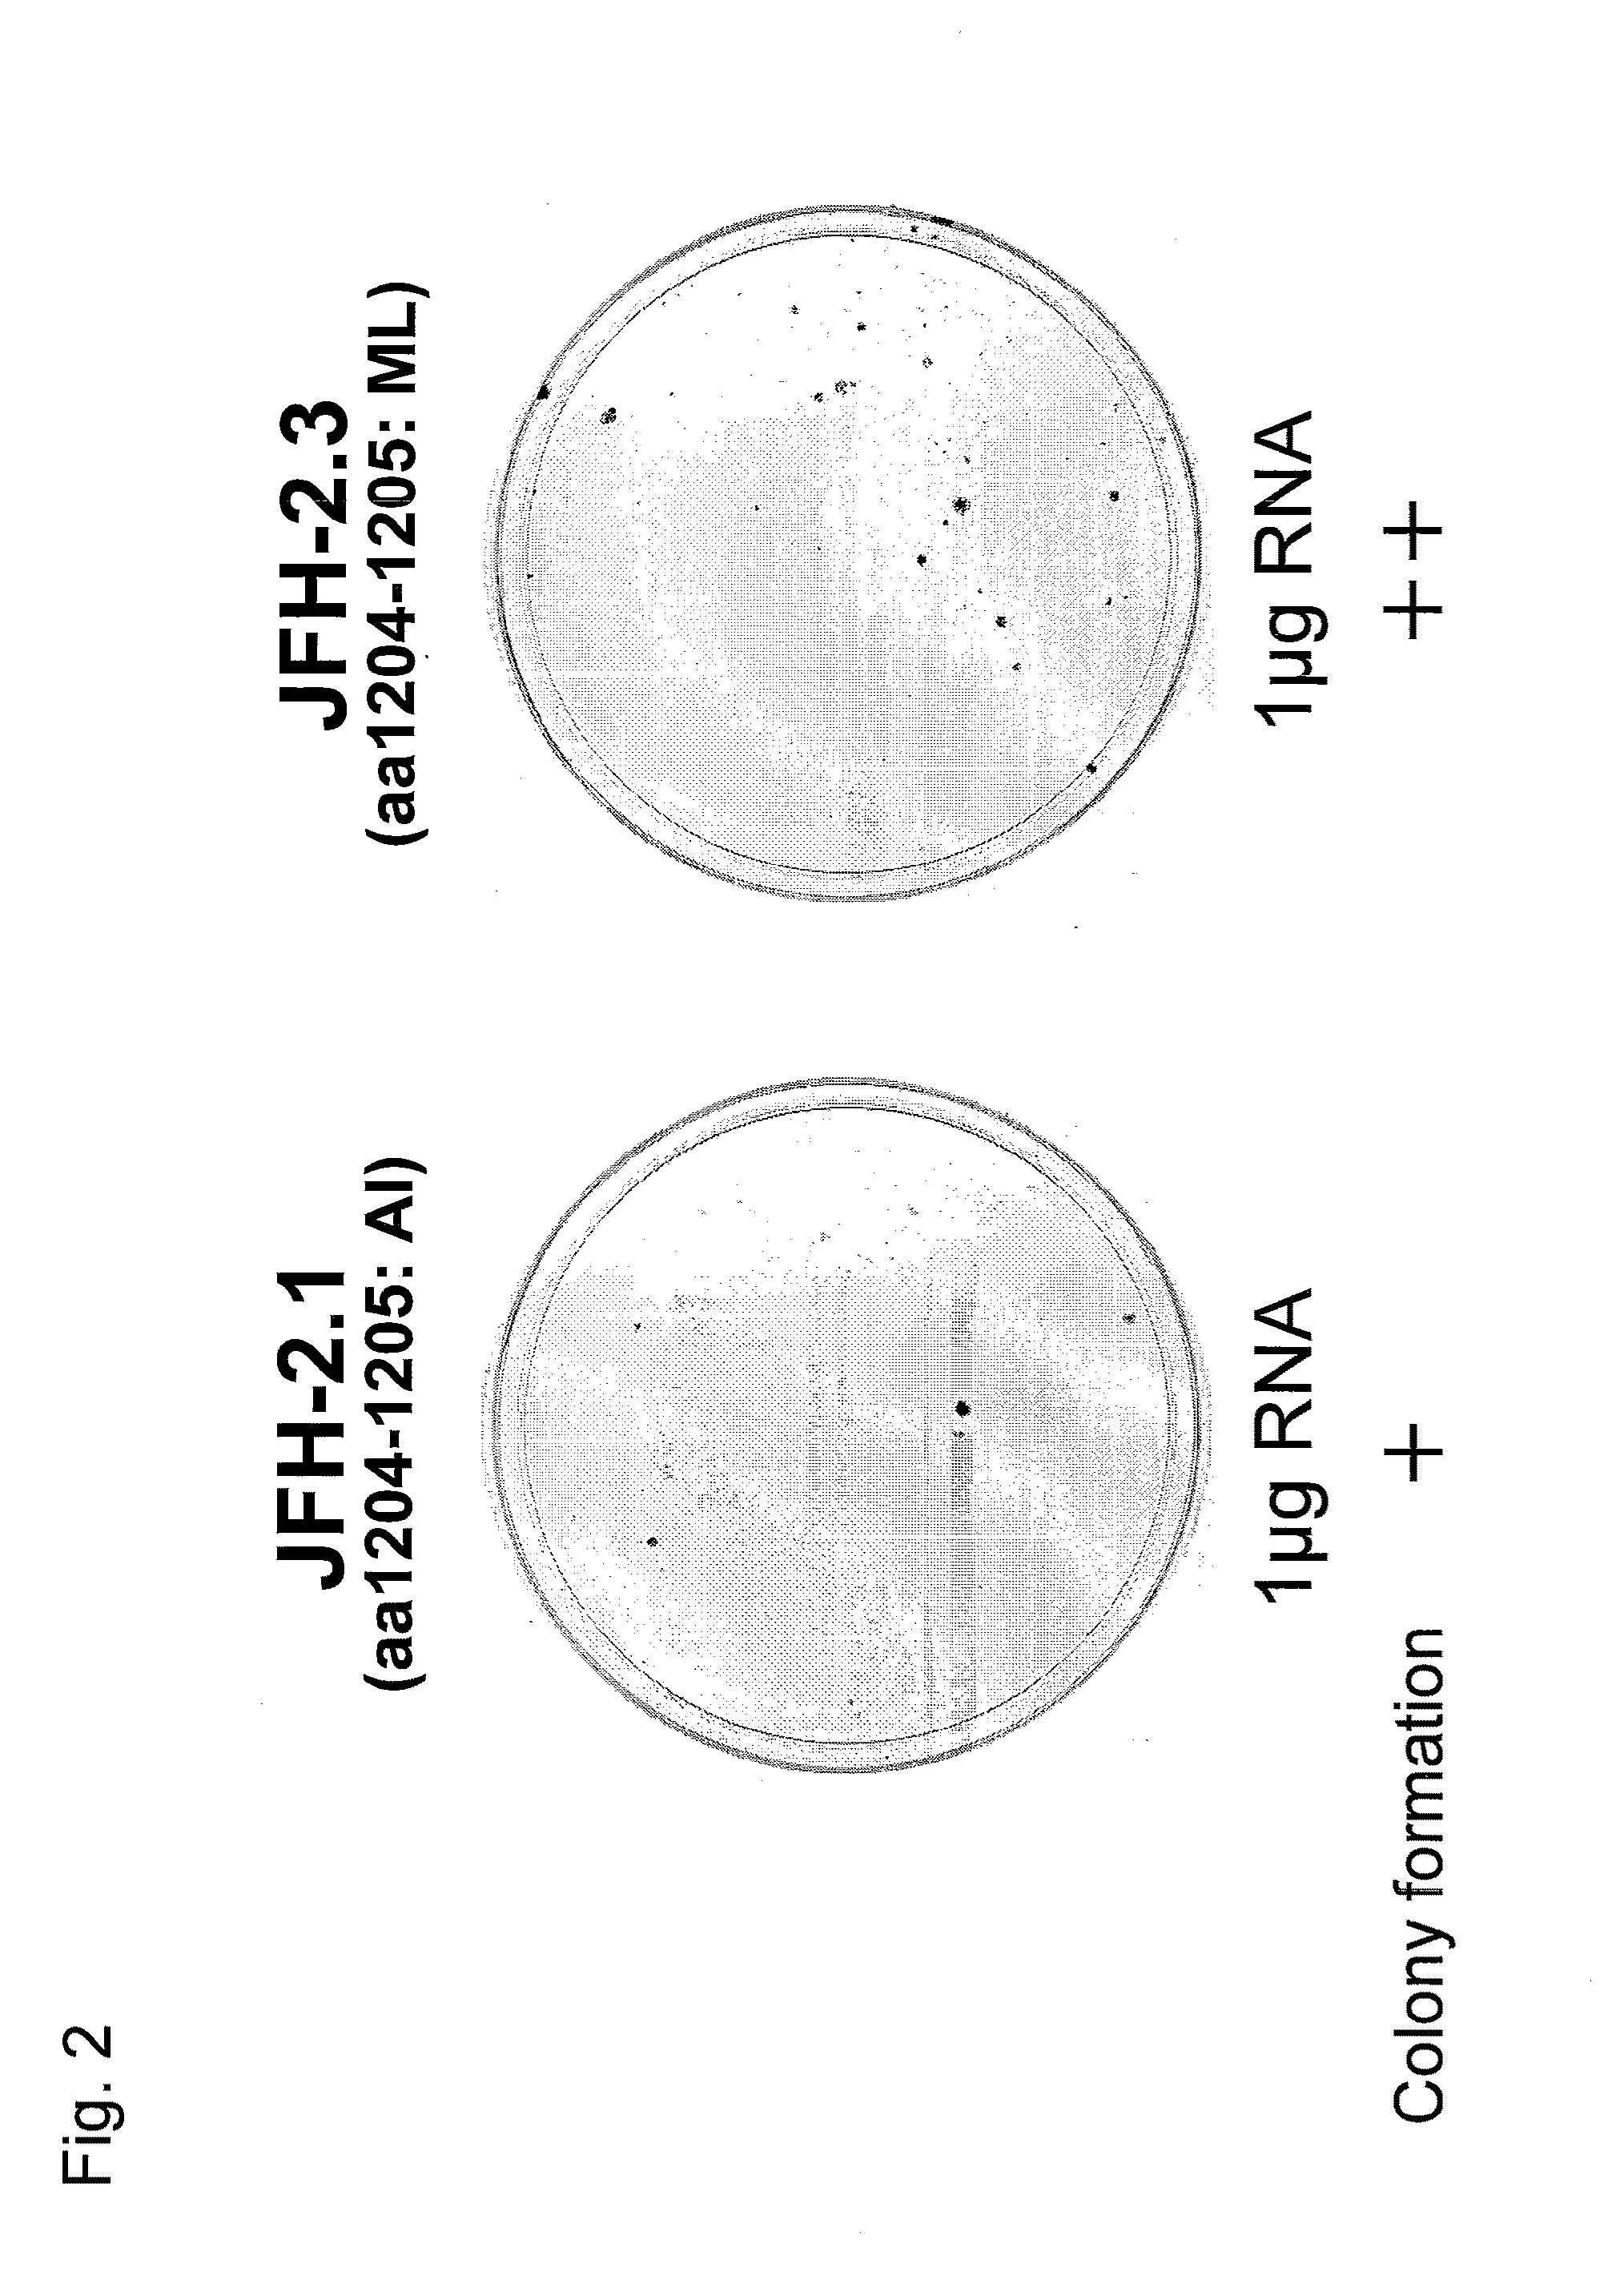 Nucleic acid derived from hepatitis c virus and expression vector, transformed cell, and hepatitis c virus particles each prepared by using the same